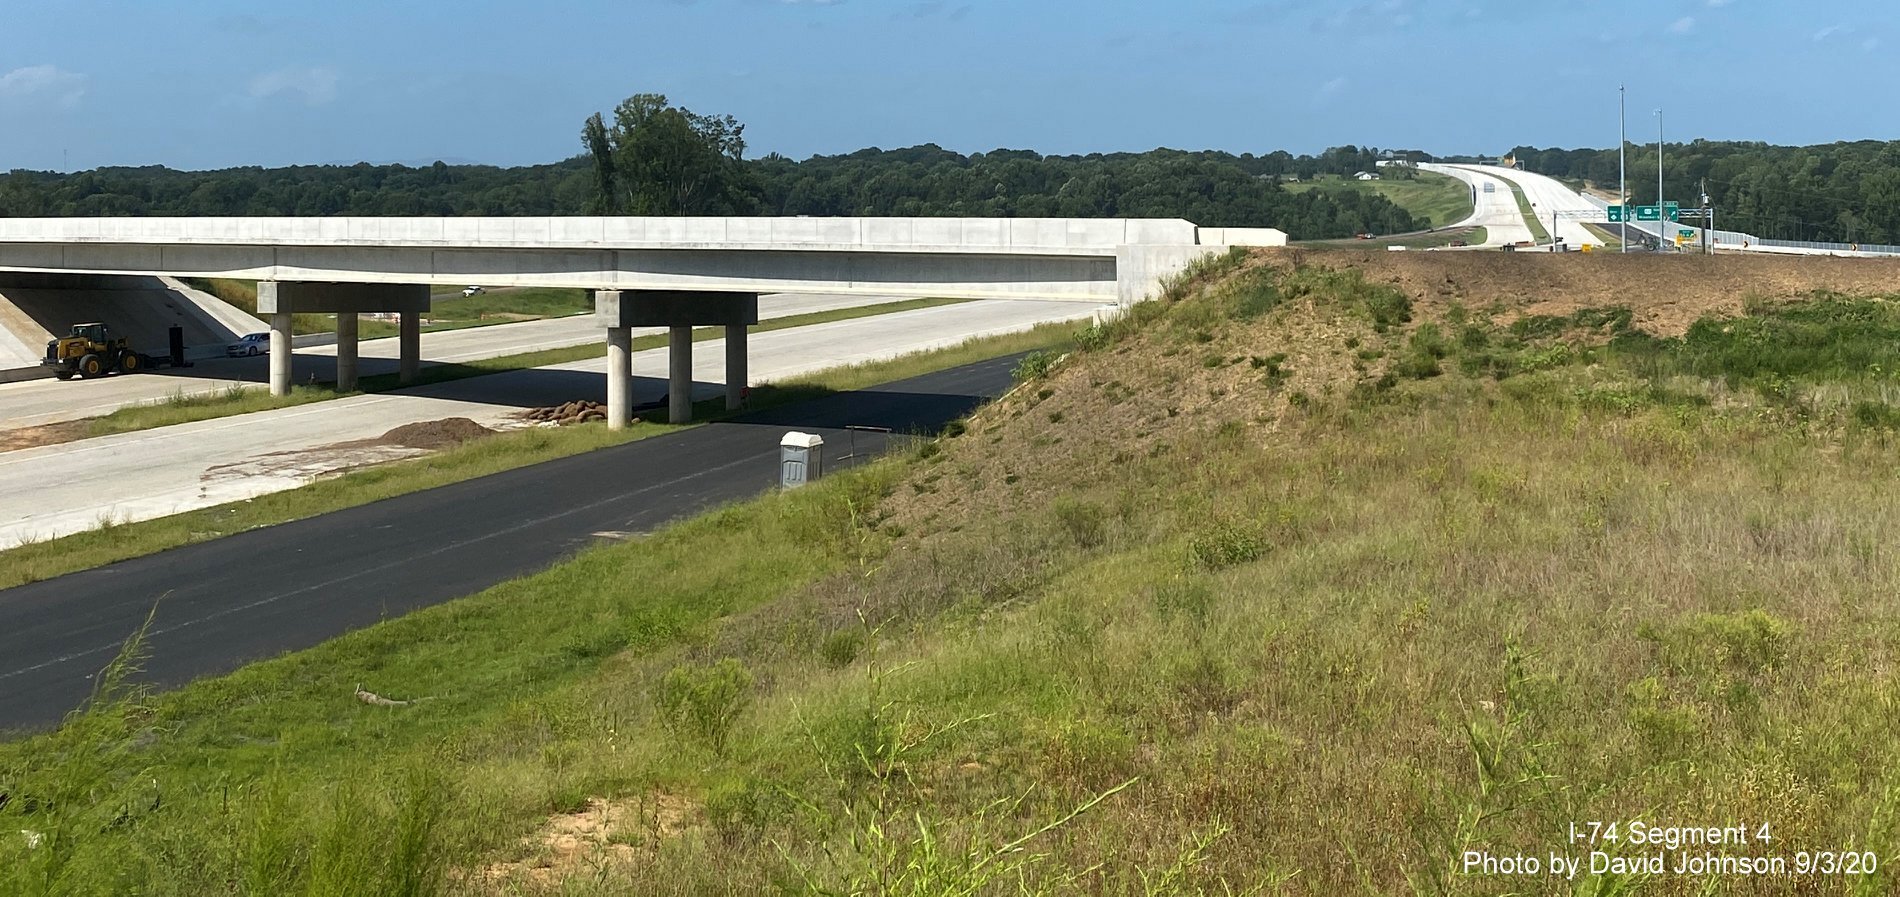 Image of US 421 interchange with NC 74 Winston Salem Northern Beltway prior to opening, by David Johnson September 2020